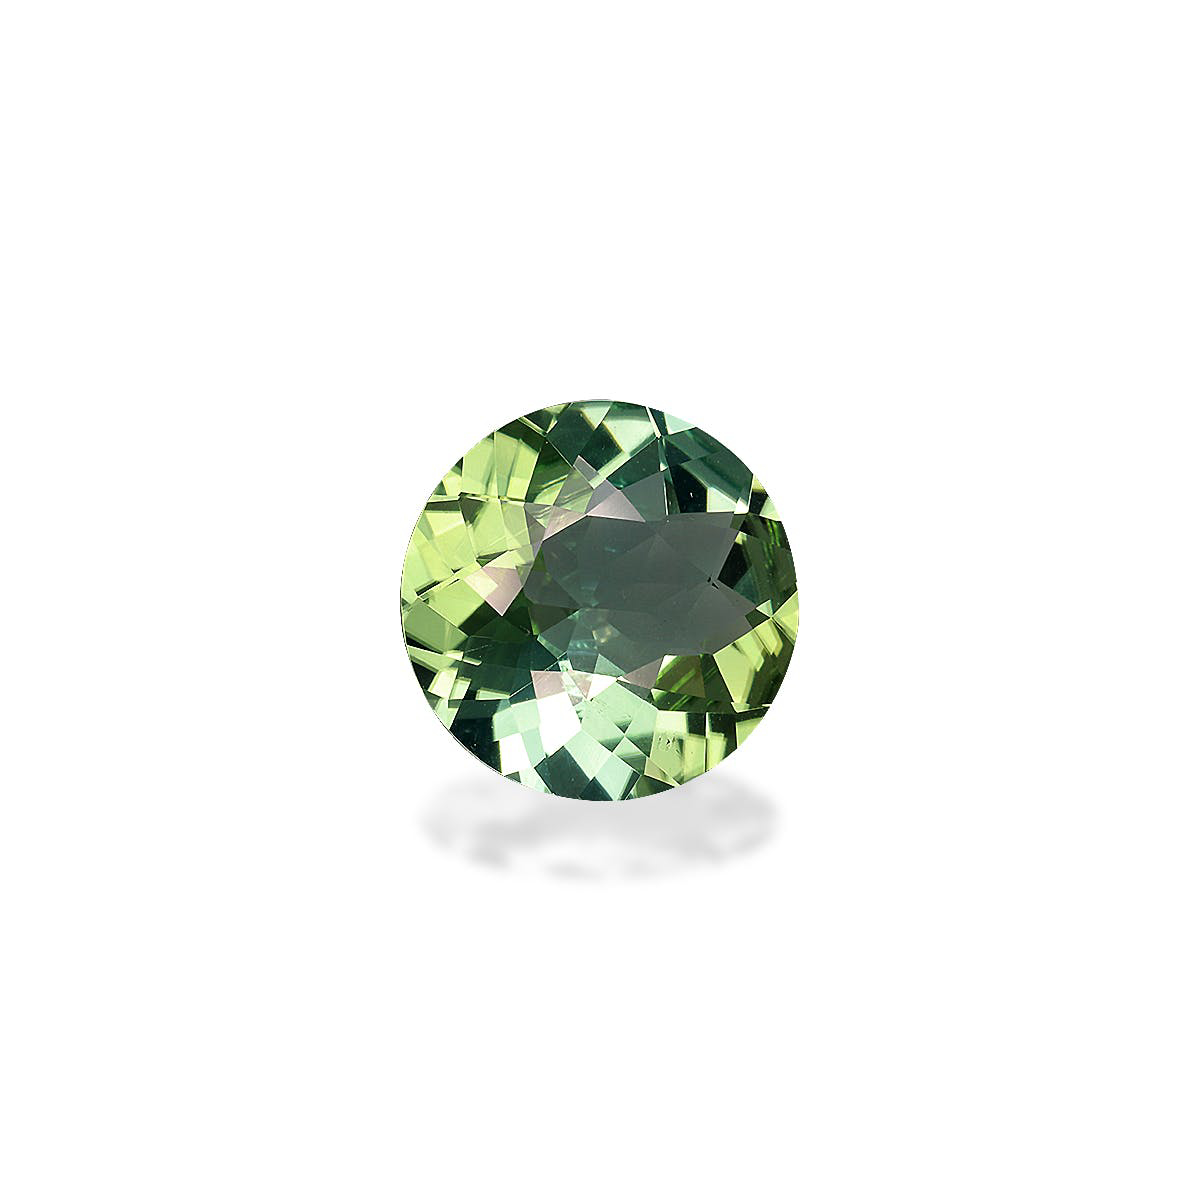 Picture of Green Tourmaline 6.54ct - 13mm (TG0641)